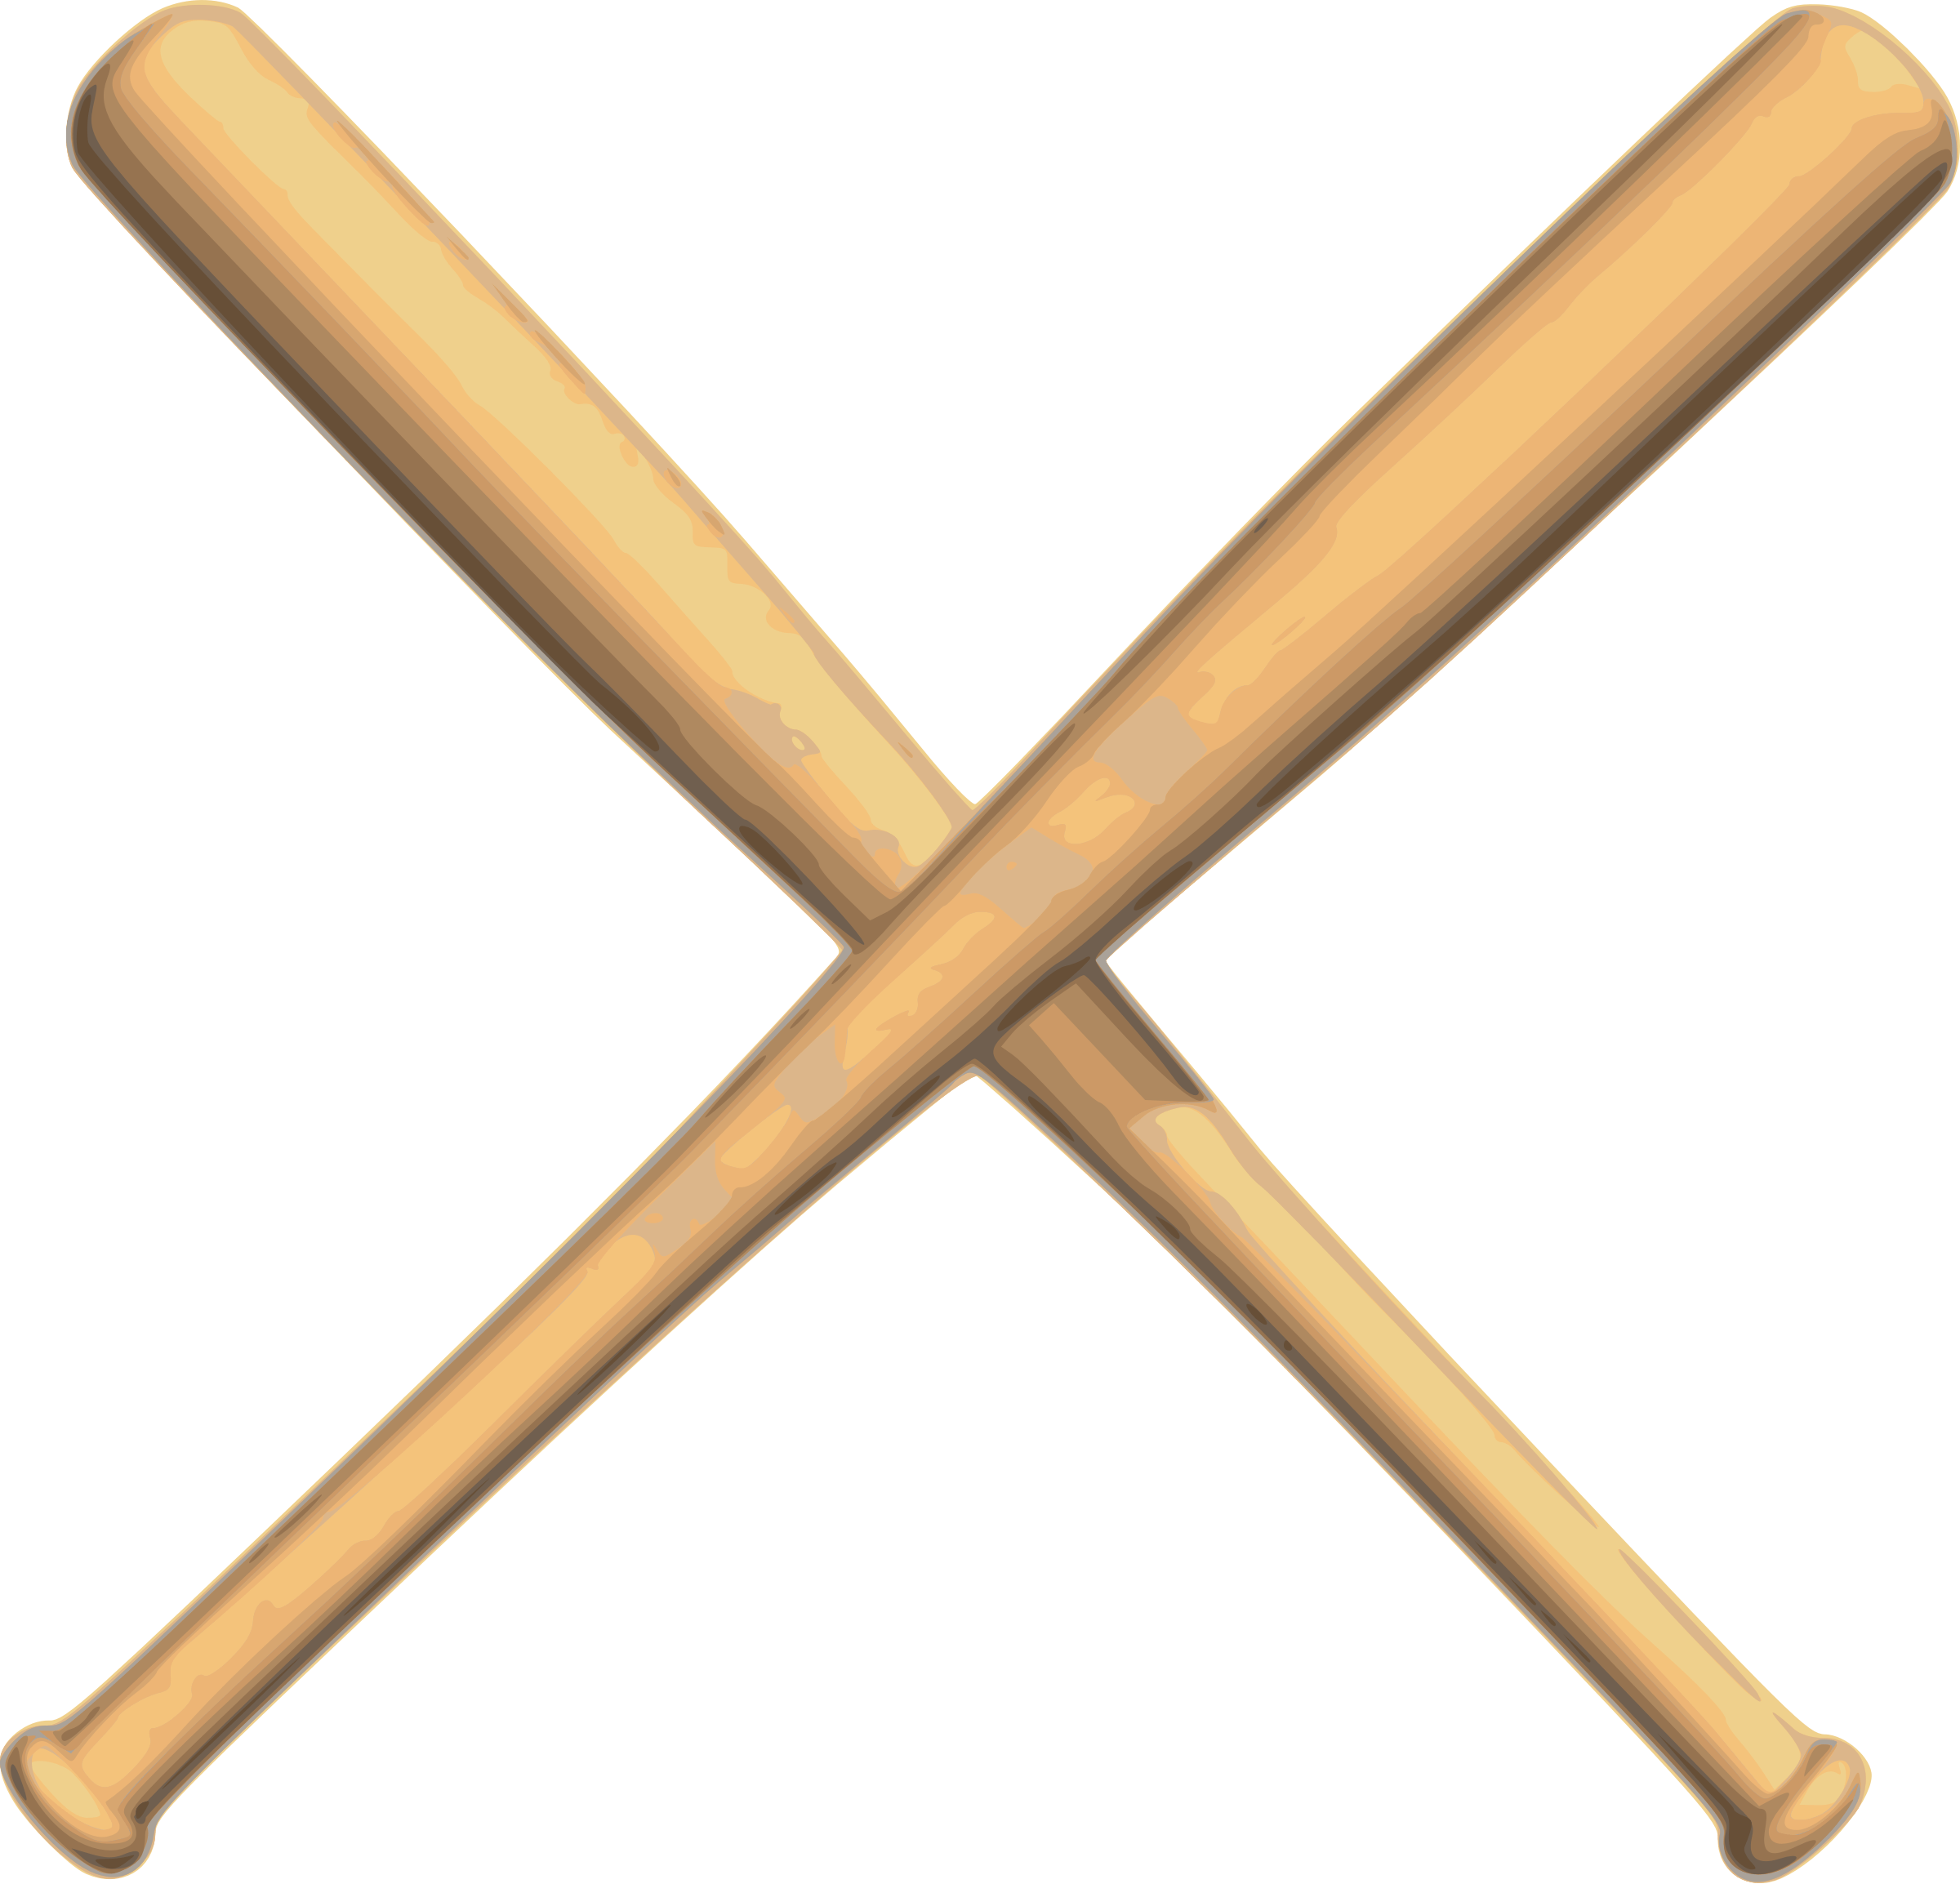 Free Picture Of Baseball Bats, Download Free Clip Art, Free